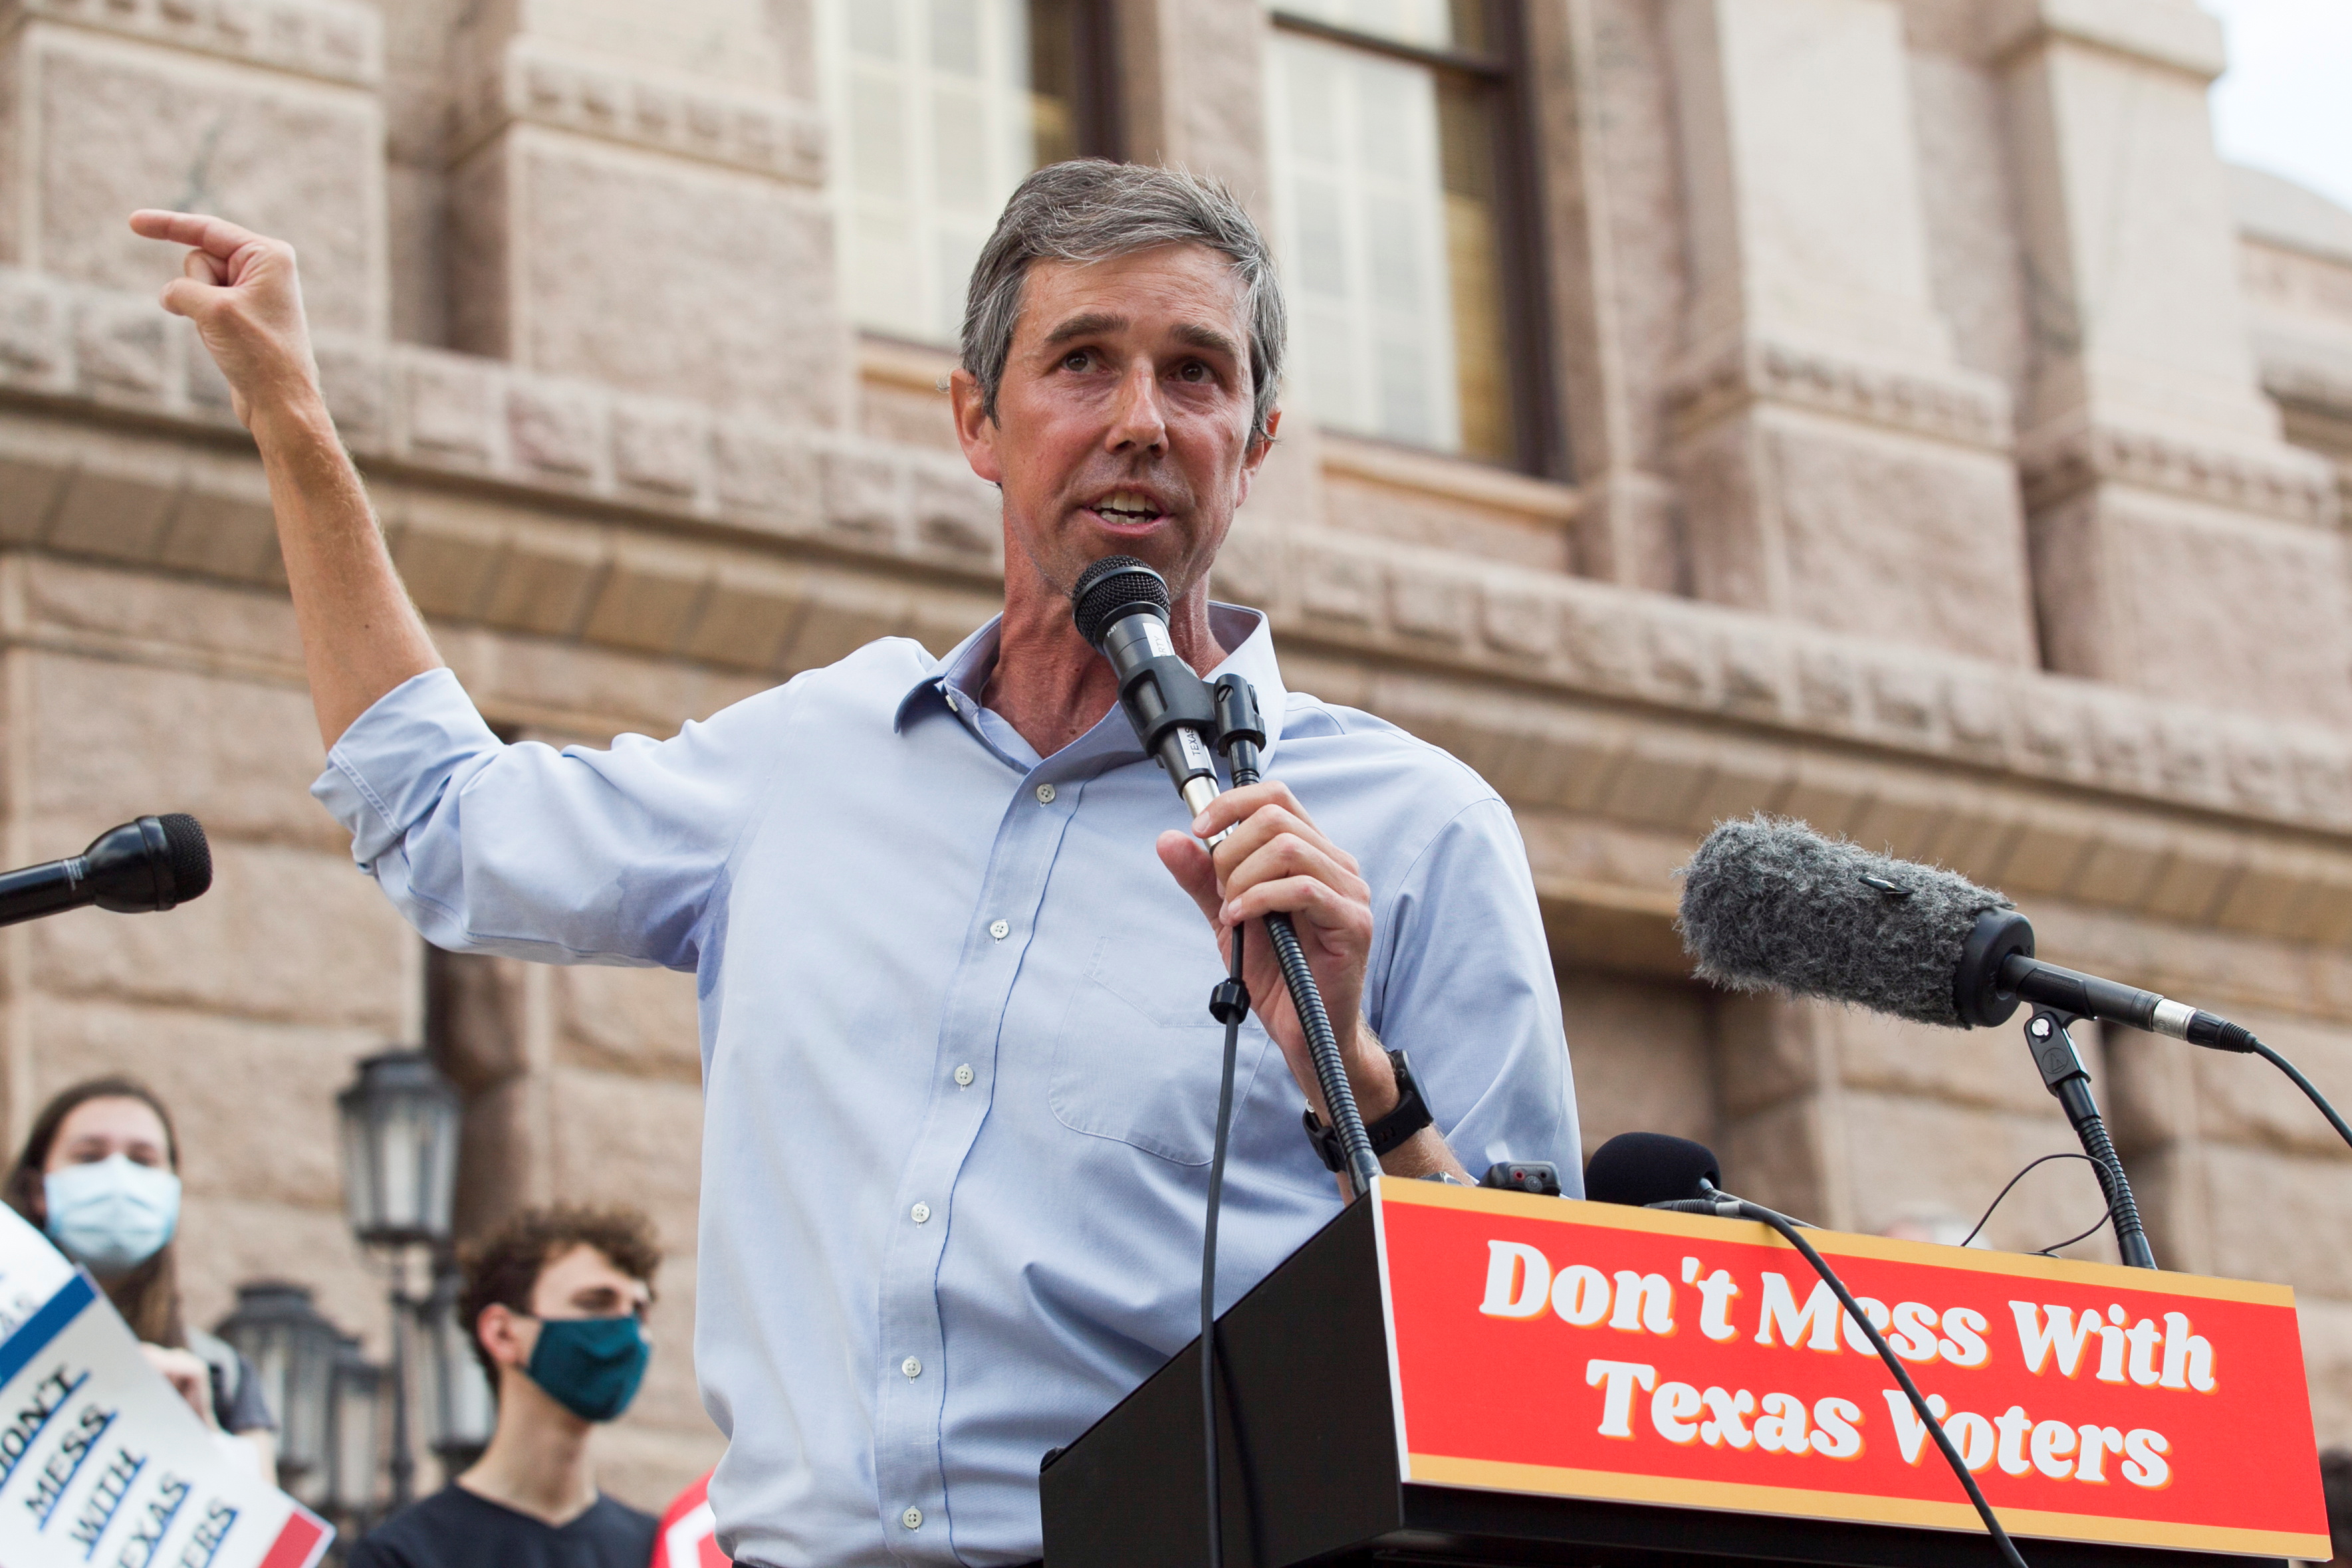 Former U.S. Representative and presidential candidate Beto O'Rourke speaks during a protest against Texas legislators who are advancing a slew of new voting restrictions in Austin, Texas, U.S., May 8, 2021. REUTERS/Mikala Compton